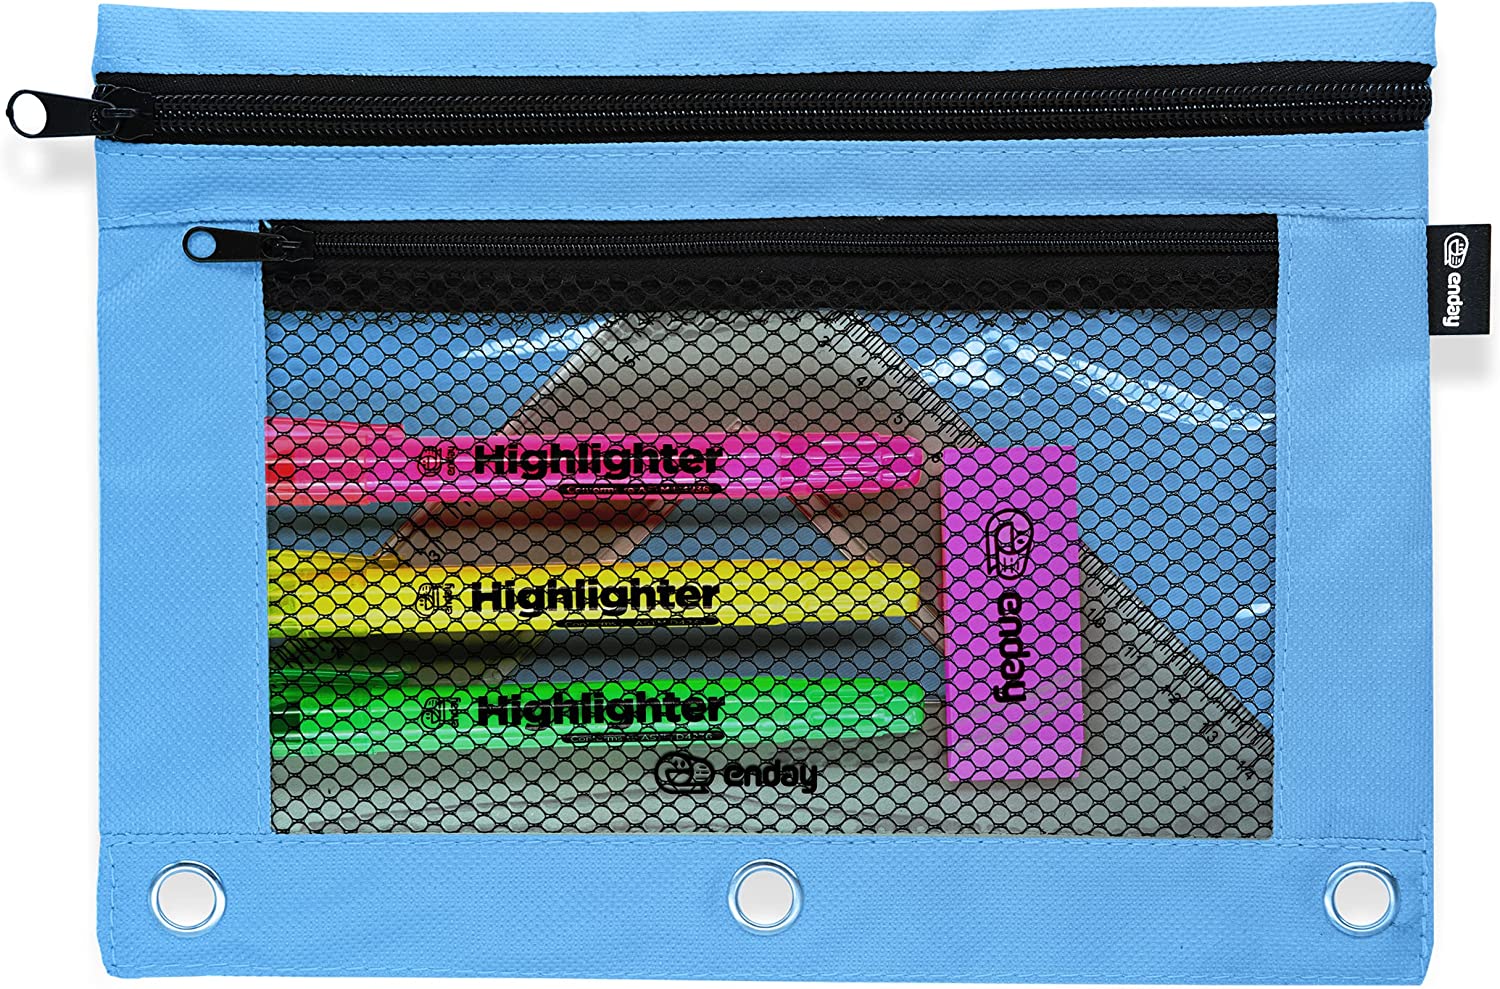 Enday Big Capacity Pencil Case, 3 Compartments Pencil Bags With